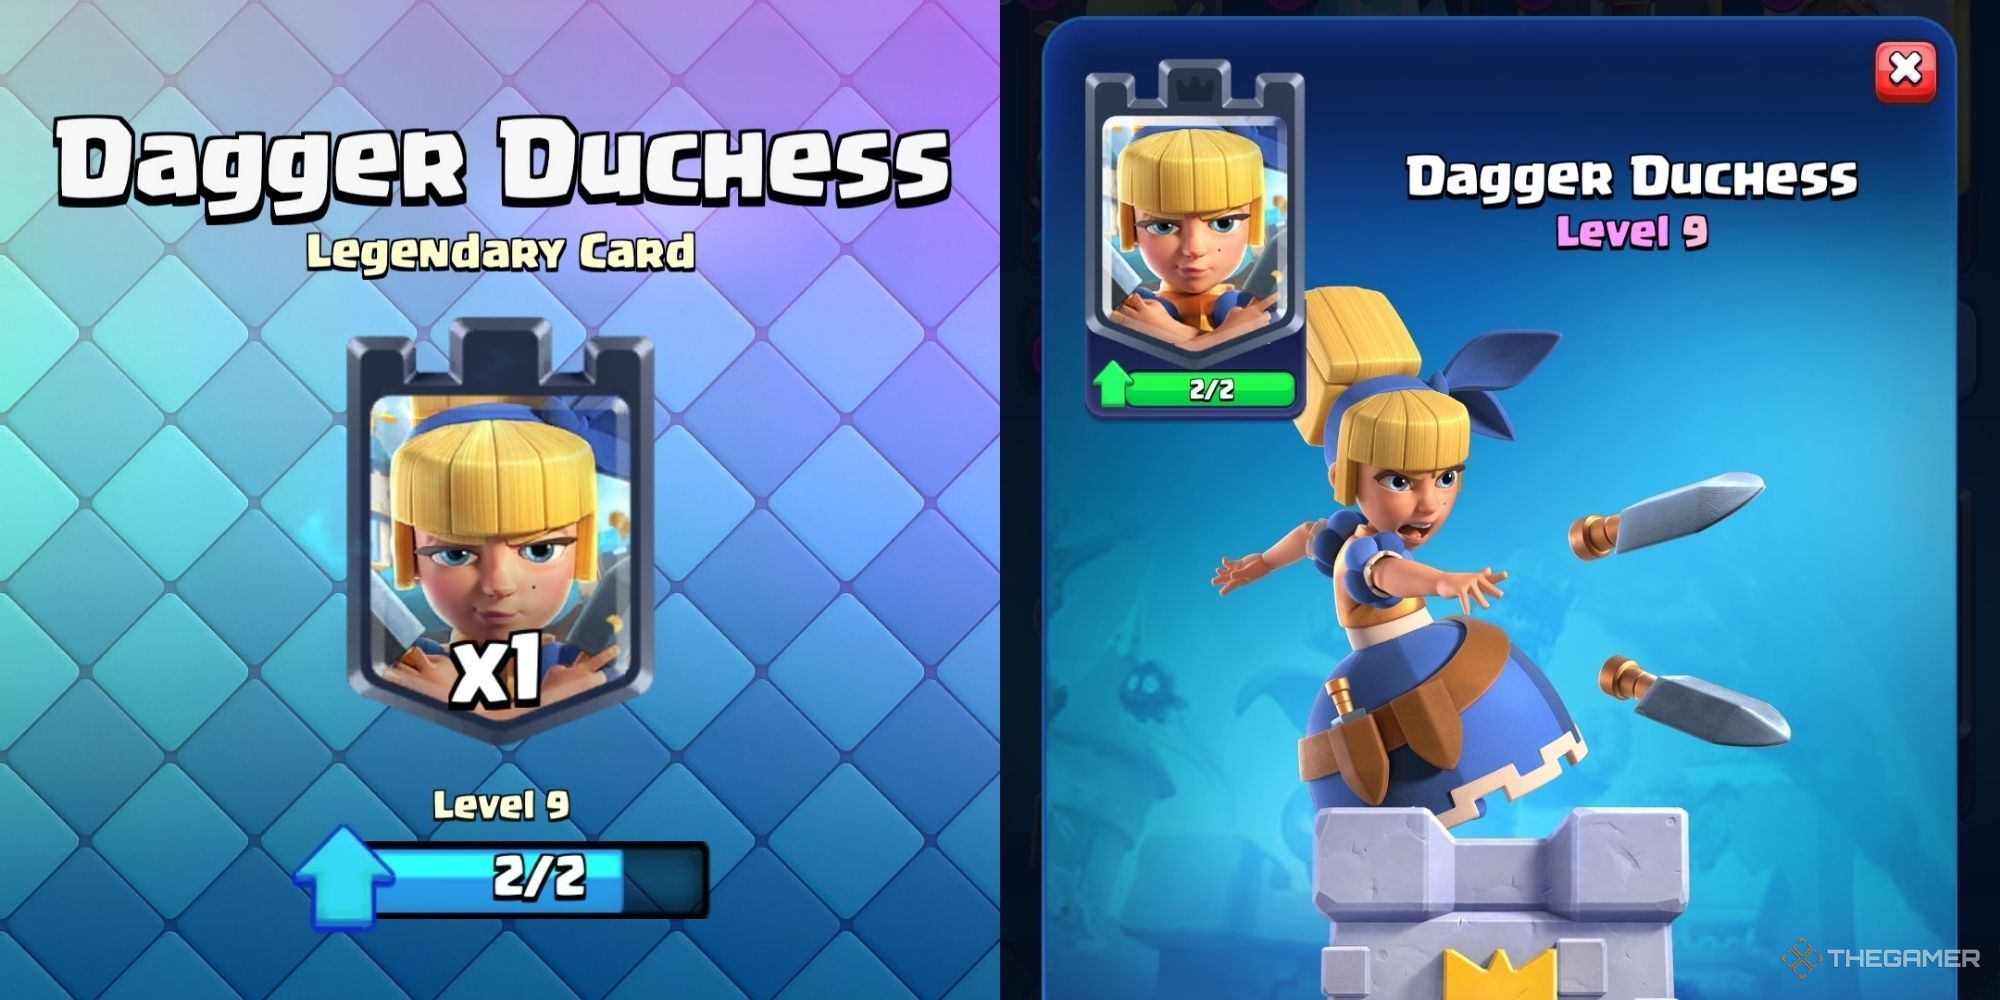 How To Unlock Dagger Duchess In Conflict Royale